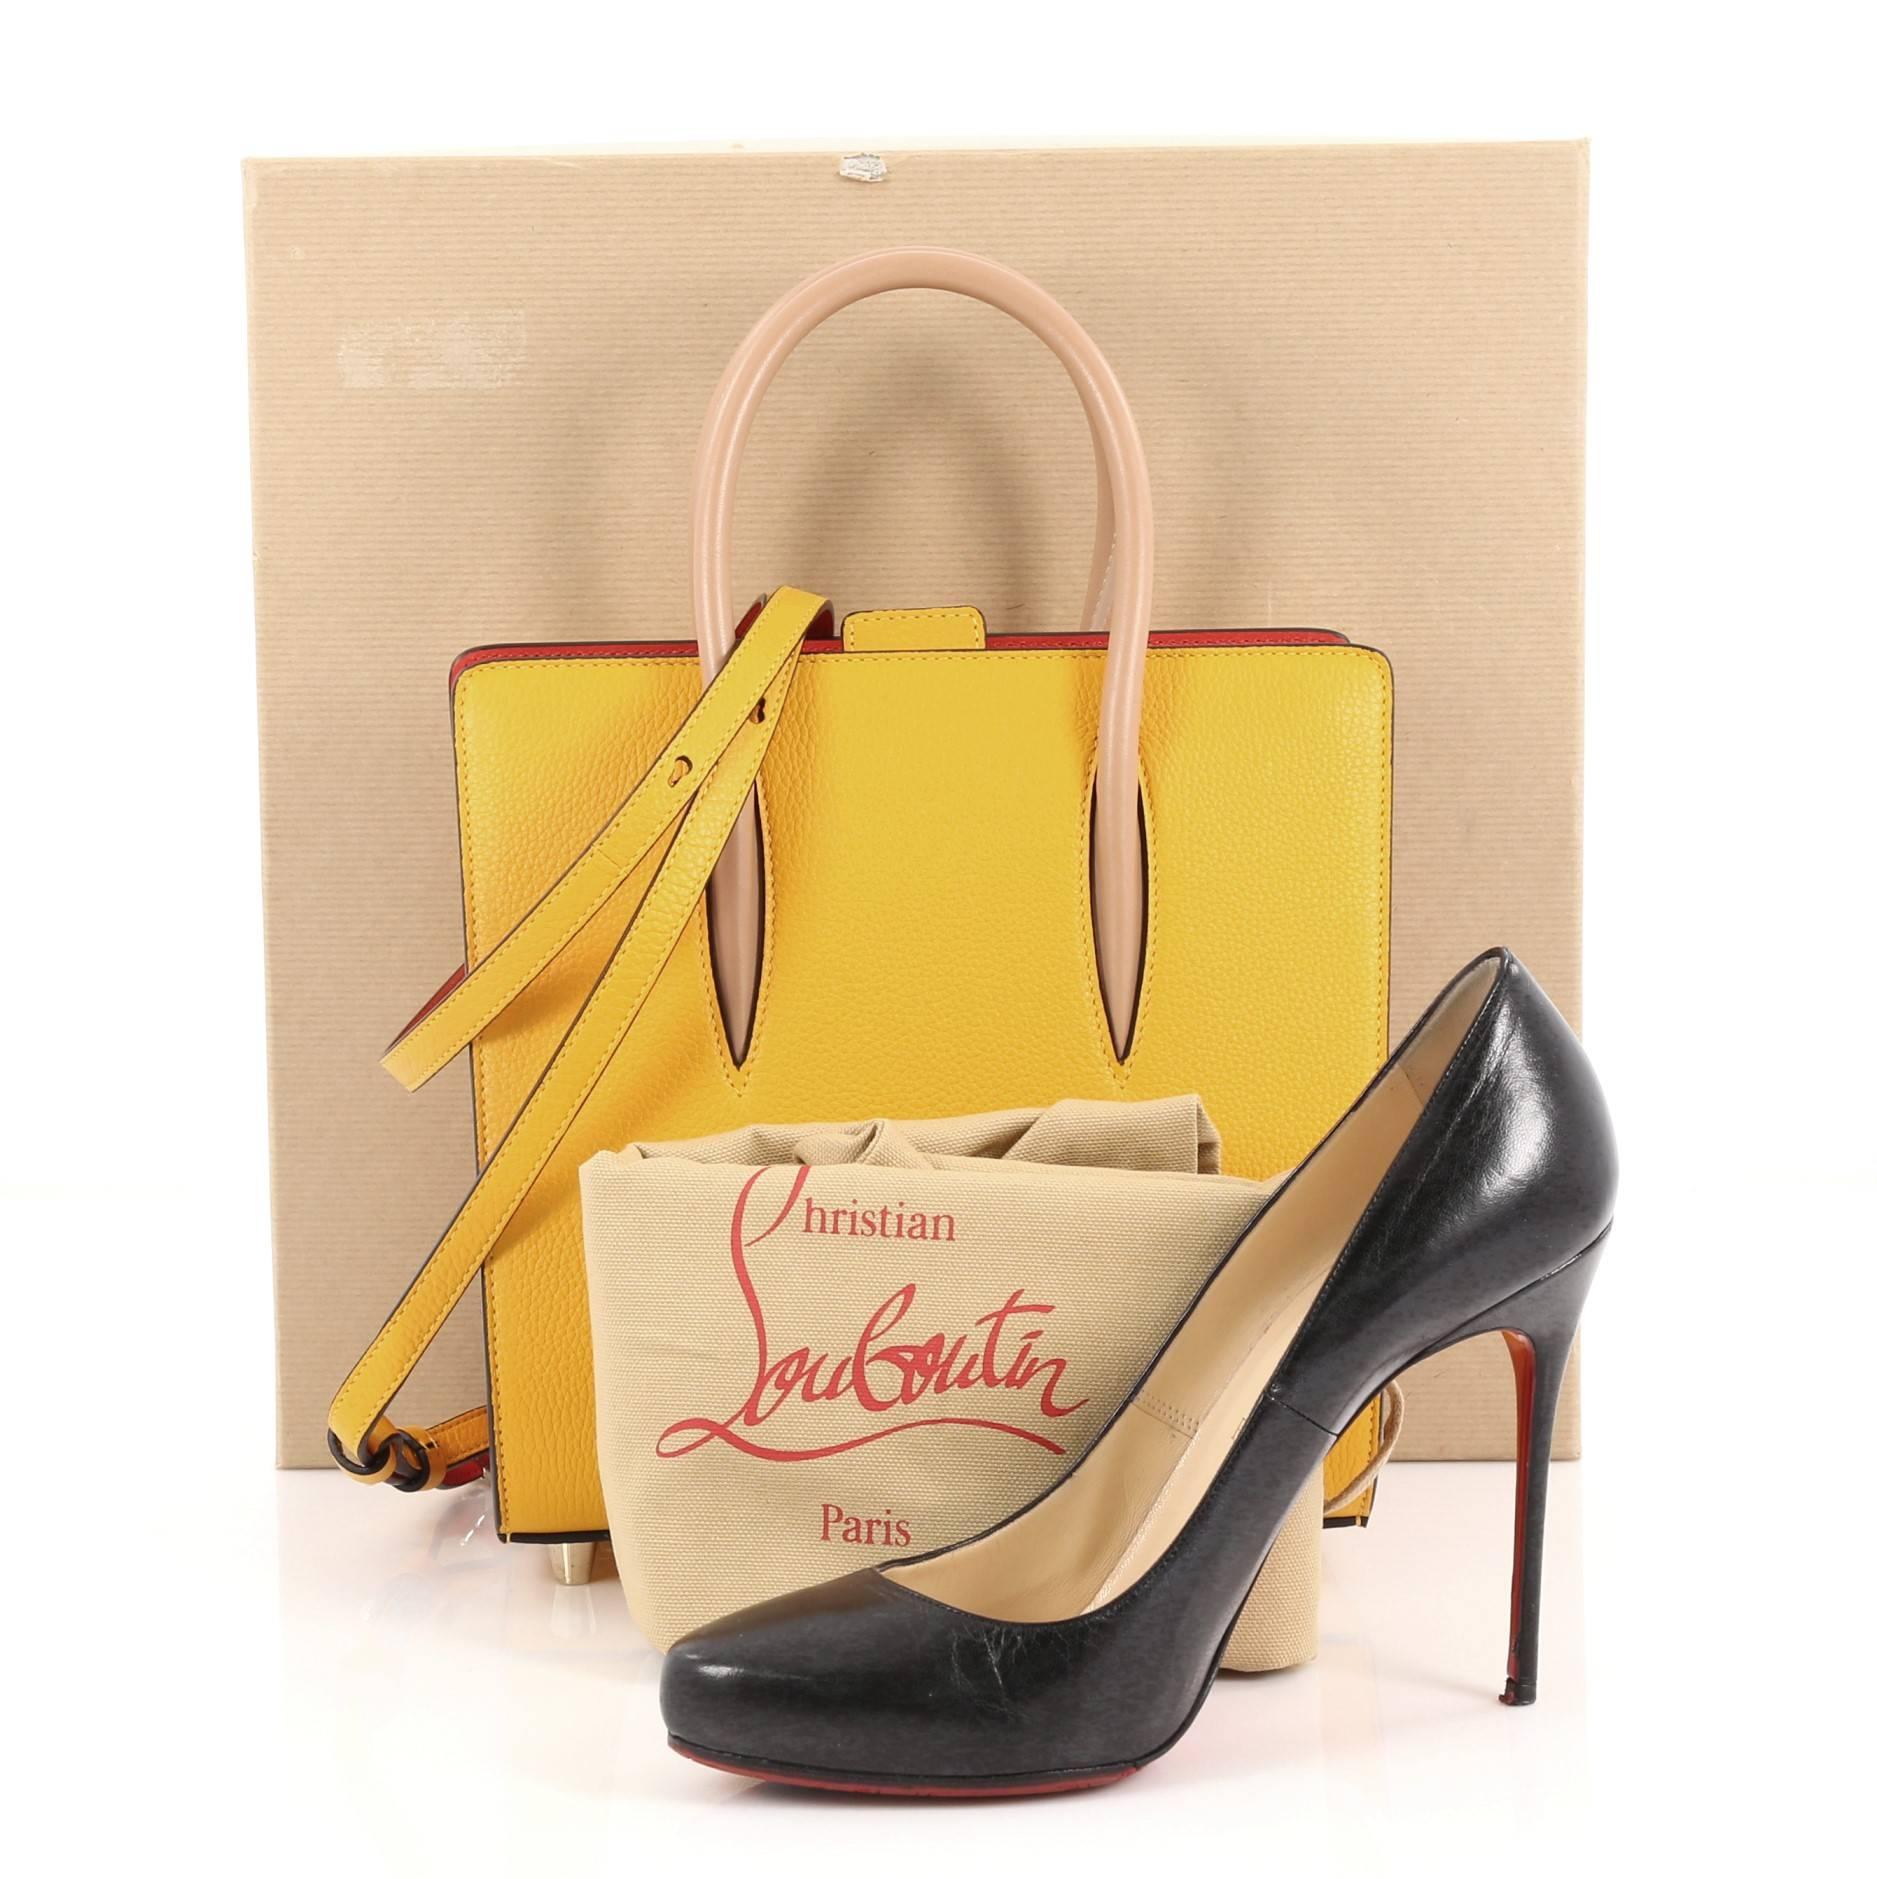 This authentic Christian Louboutin Paloma Tote Leather with Africube Textile Small is a unique piece made for avant-garde fashionistas. Crafted in yellow leather with multicolor Africube textile at sides, this stand-out daring bag features tall